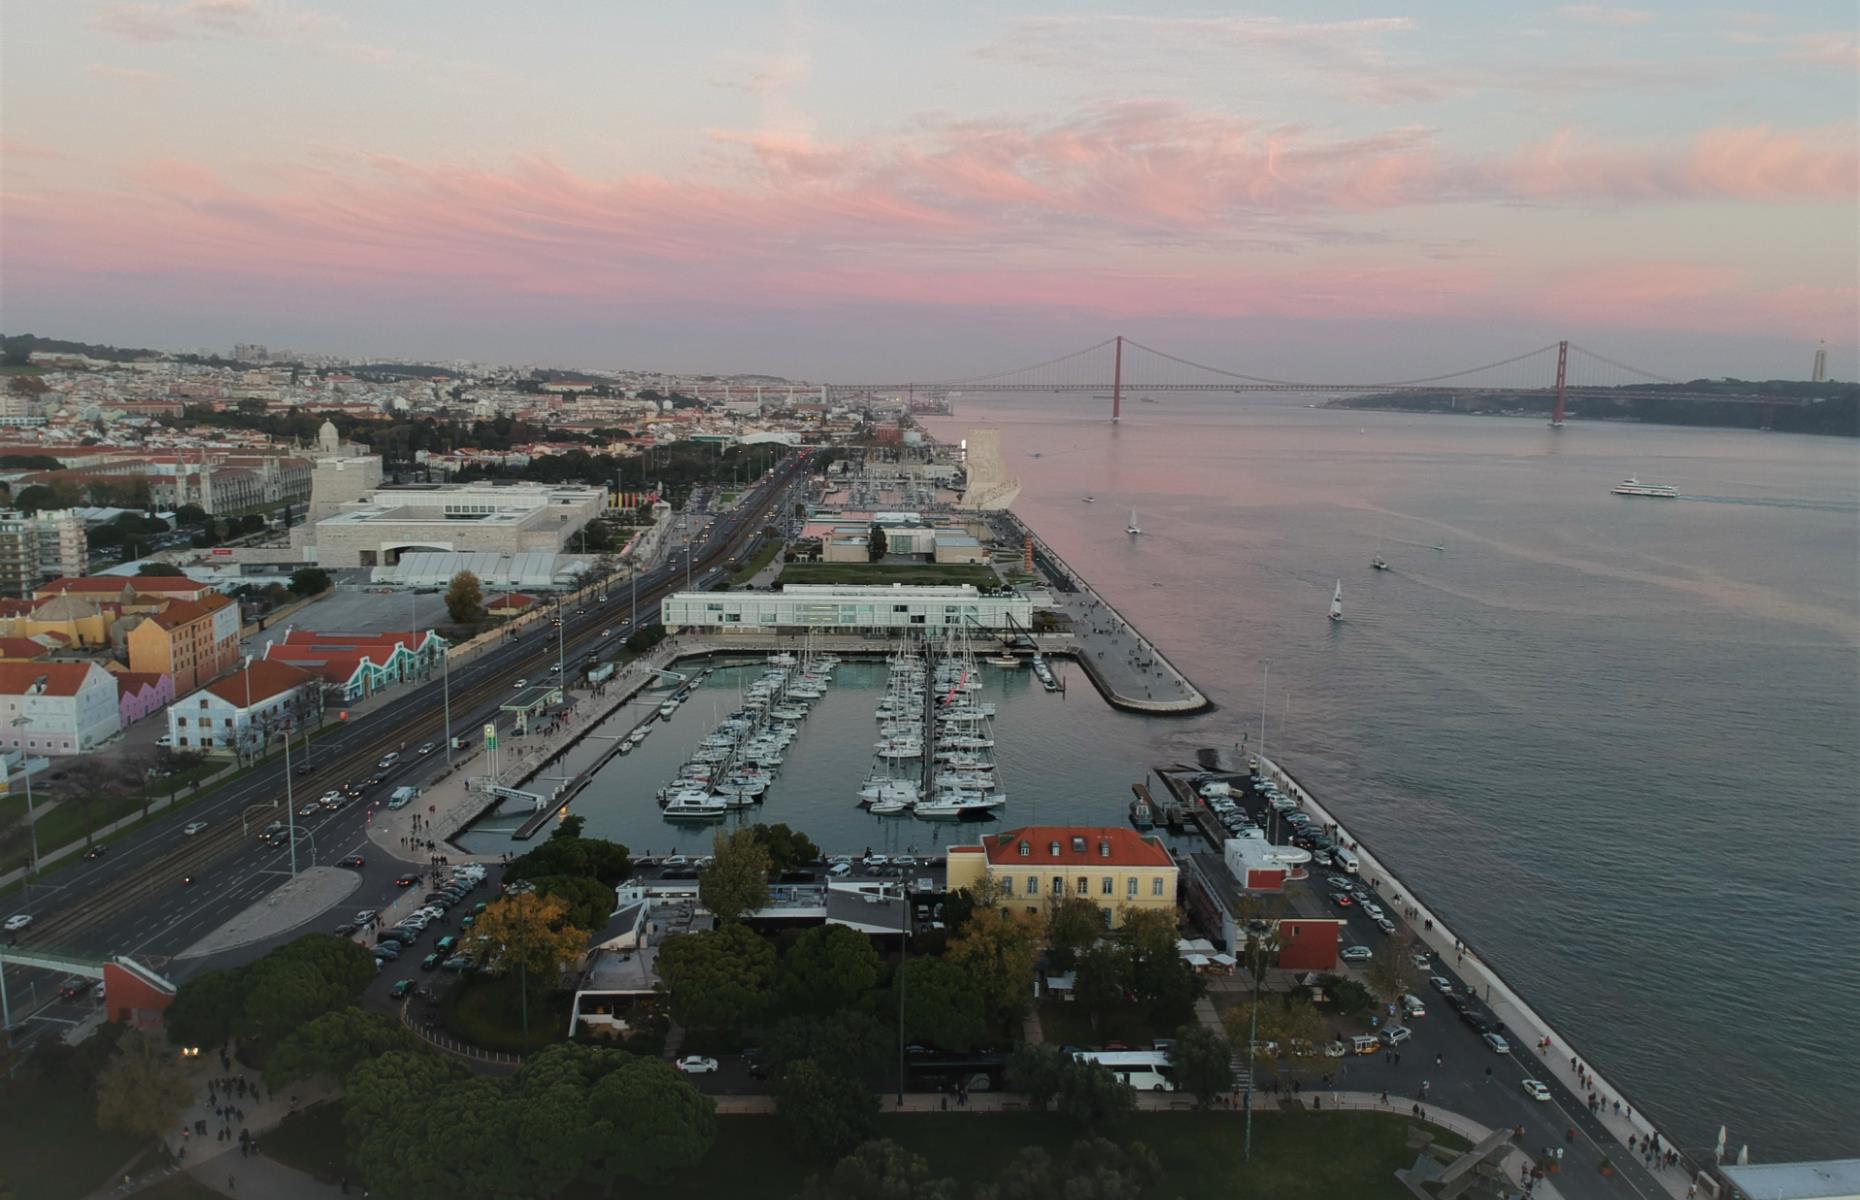 Captured at sunset in this stunning aerial shot, Lisbon’s historic port is a hub for both trade and tourism. Positioned at the mouth of the Tejo (Tagus) river and between the Mediterranean Sea and Northern Europe, the Port of Lisbon was a historically important seaport, especially during the 15th and 16th centuries when it was the centre of the Portuguese Empire.